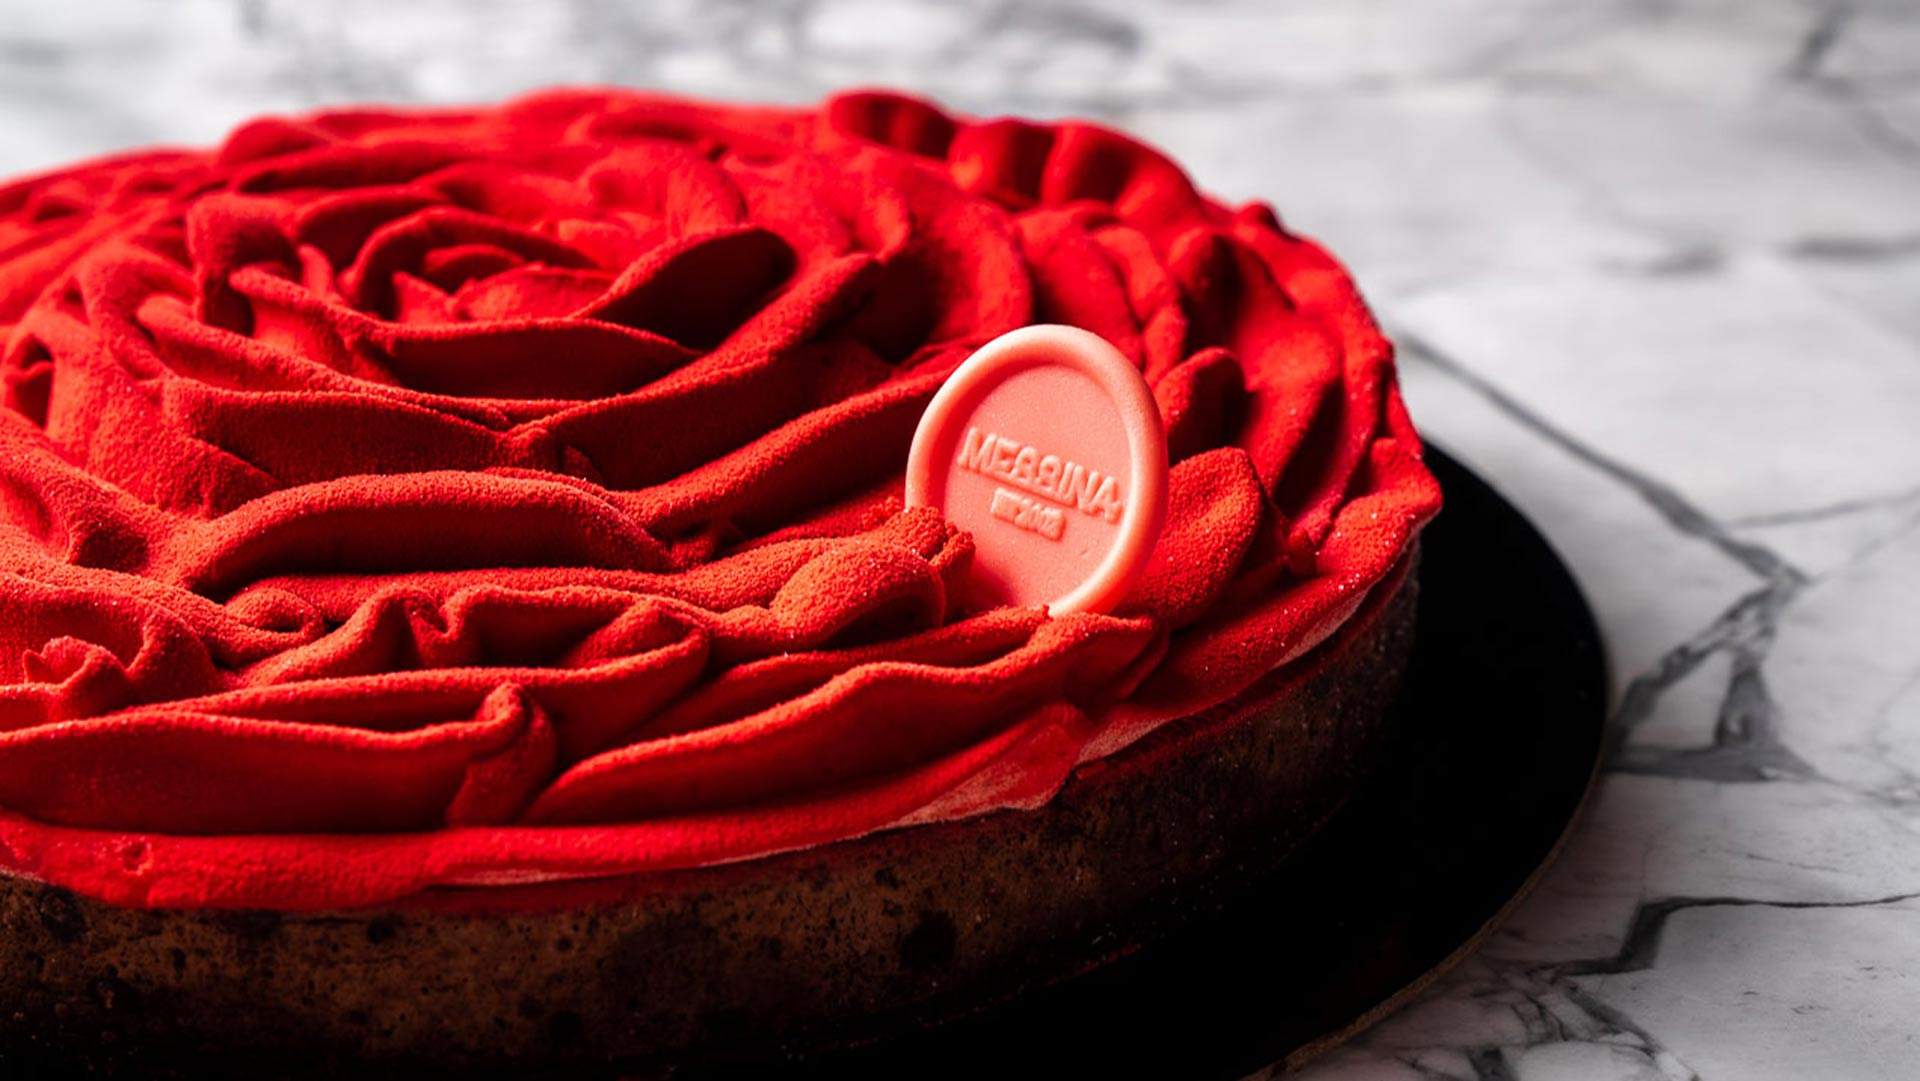 Messina Has Created an OTT Gelato Rose Cake If You Prefer Your Flowers Edible